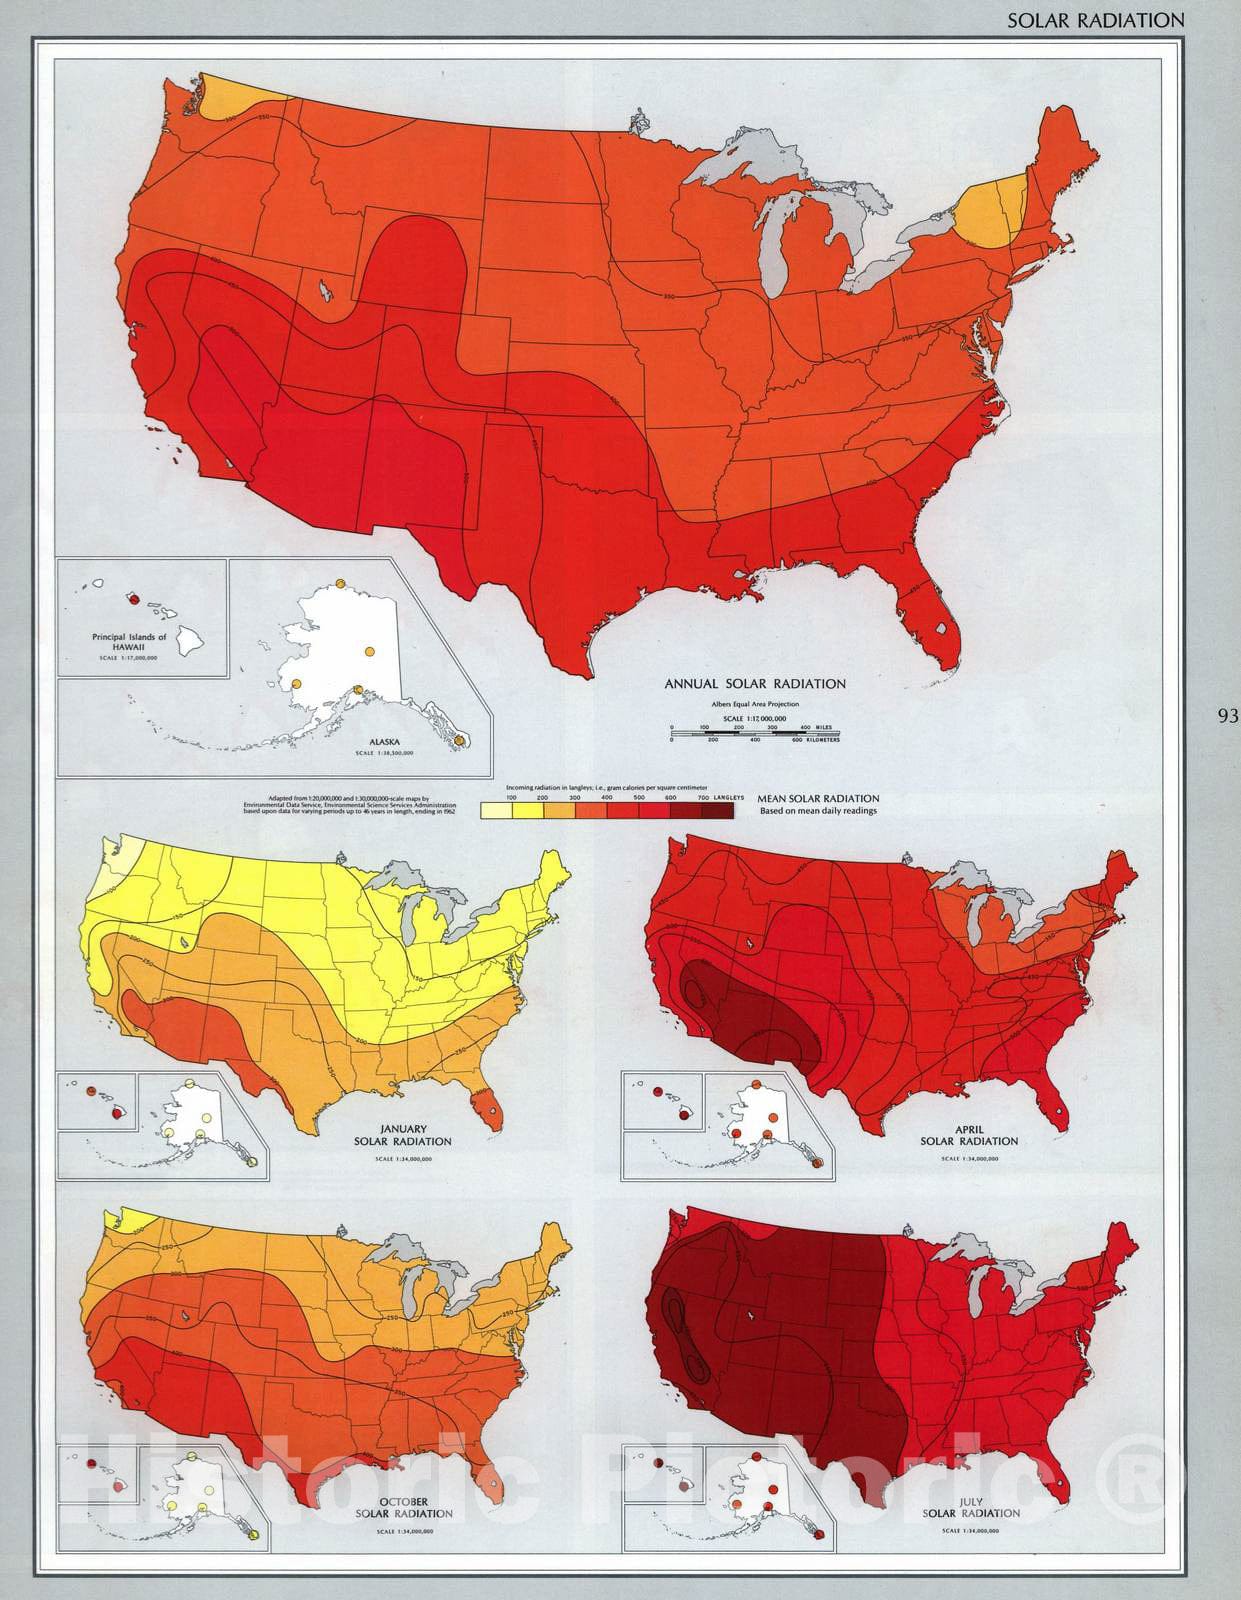 Historic 1970 Map - The National Atlas of The United States of America. - Solar Radiation